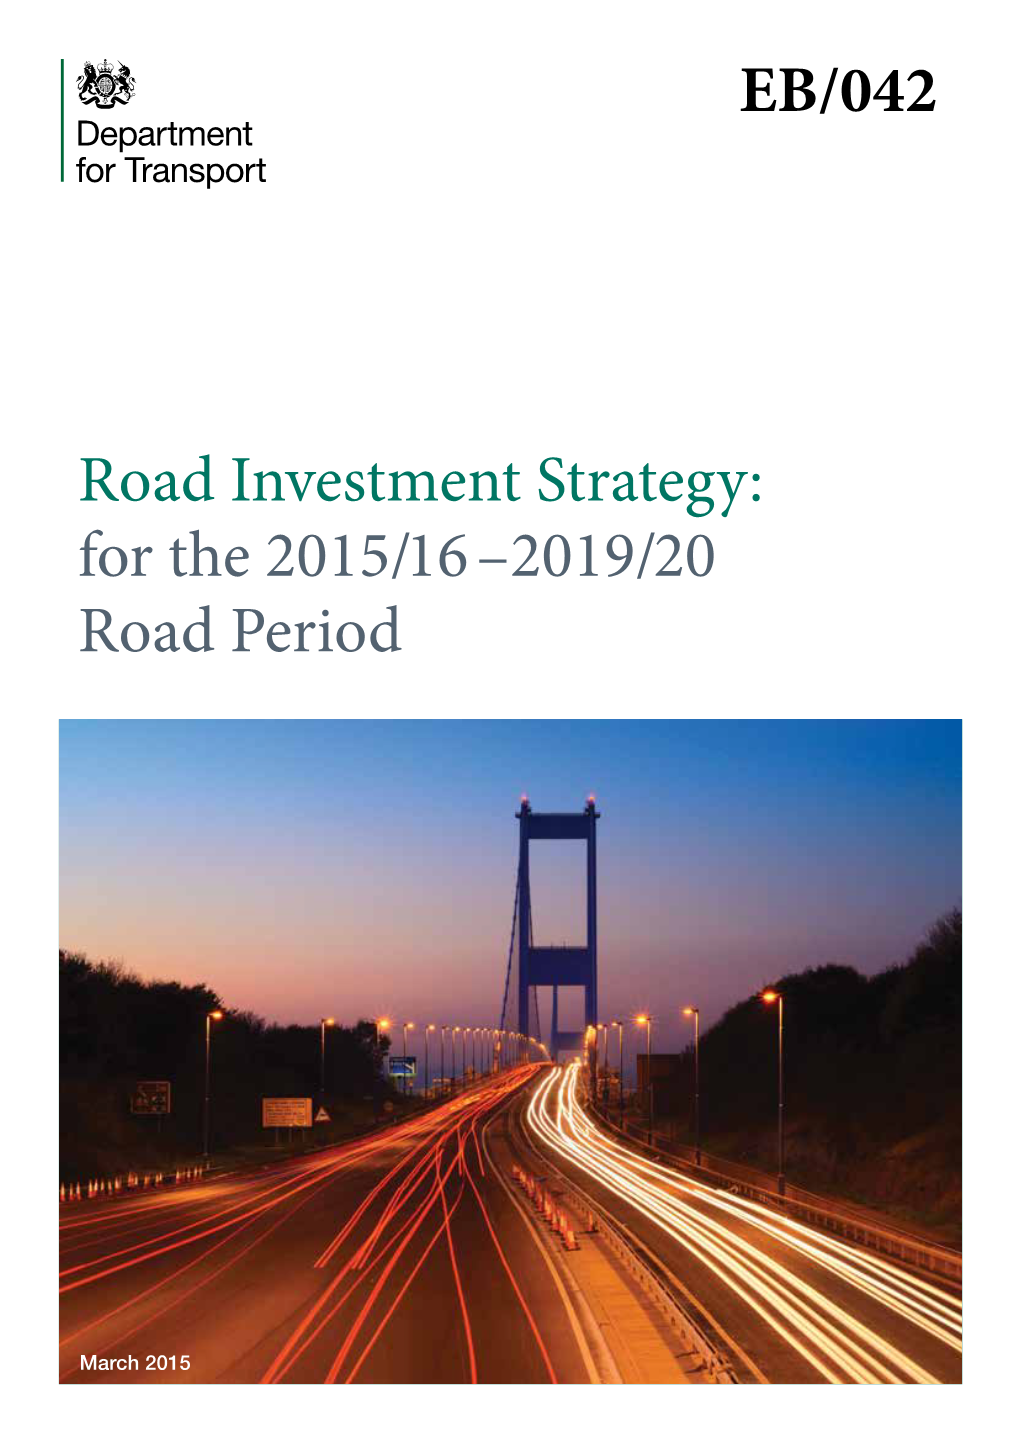 Road Investment Strategy: for the 2015/16 – 2019/20 Road Period